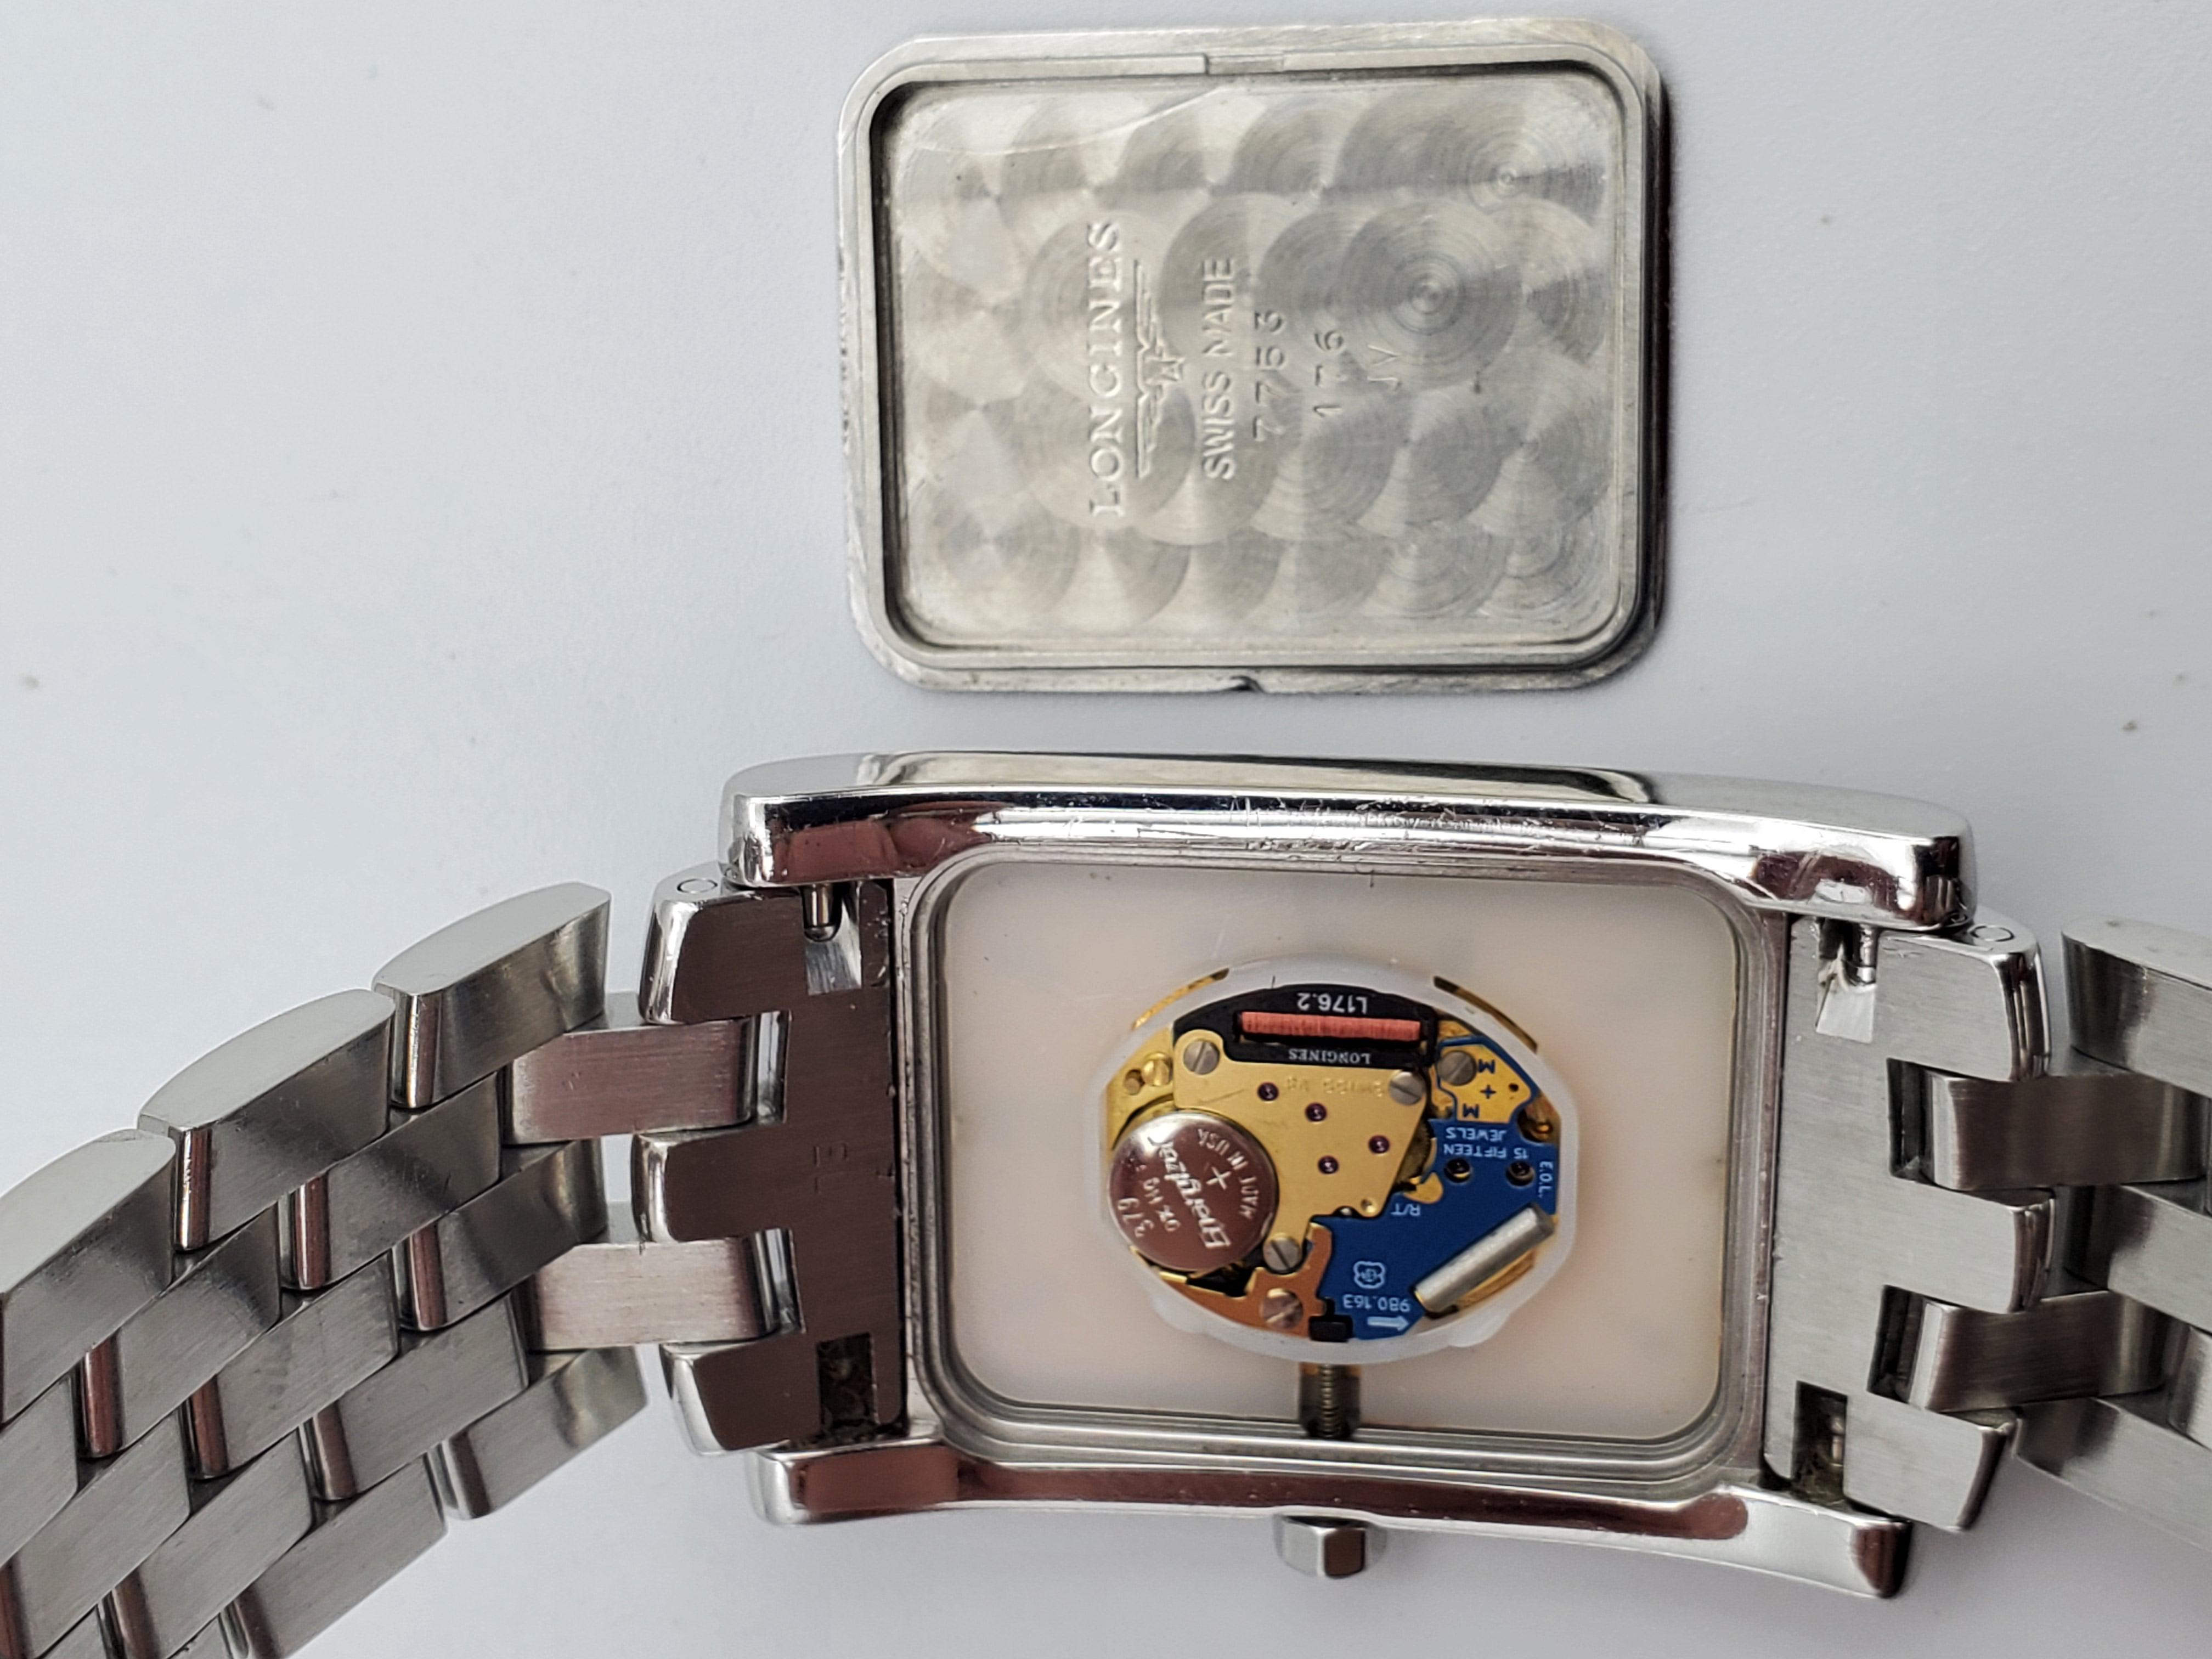 Longines Dolce Vita Tank Watch, Quartz, Model 7753, Stainless Steel, Like In Good Condition For Sale In Rancho Santa Fe, CA